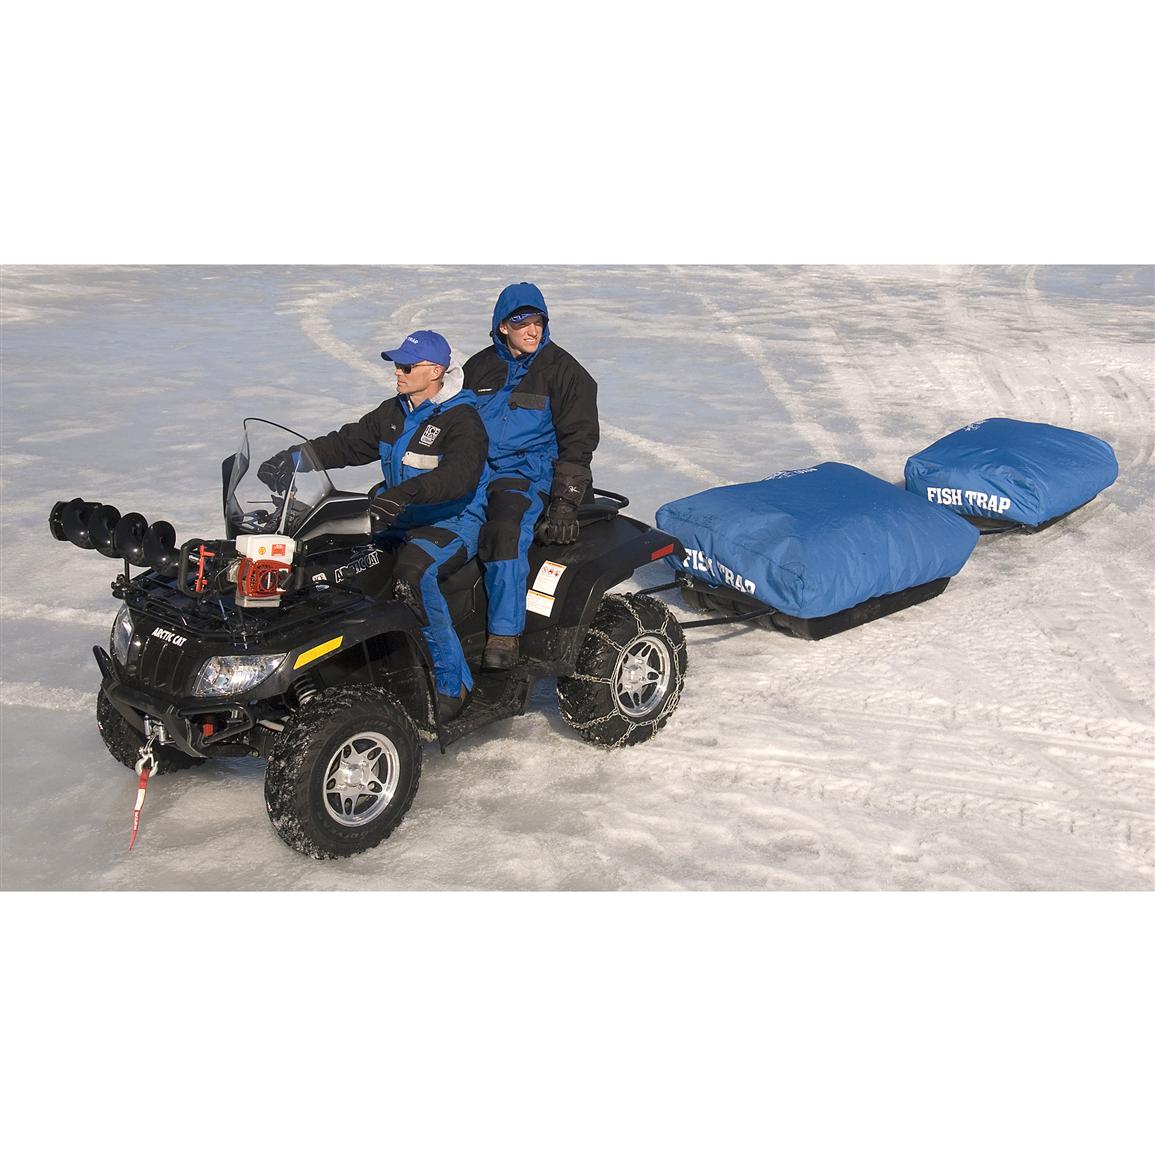 Shappell Camo Ice Fishing Jet Sled 1 with Sled Travel Cover - 676300, Ice  Fishing Sleds at Sportsman's Guide